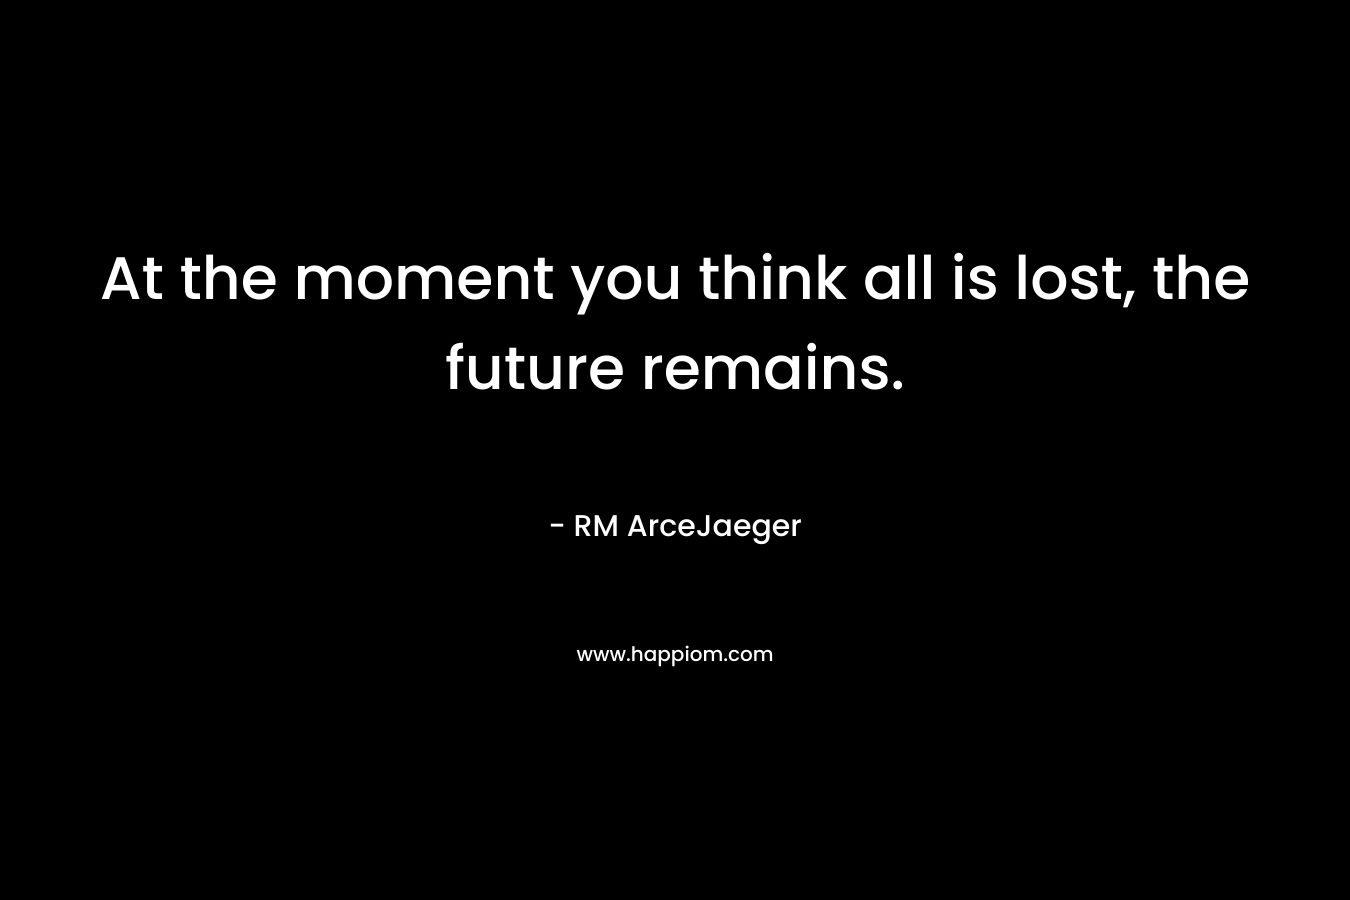 At the moment you think all is lost, the future remains. – RM ArceJaeger